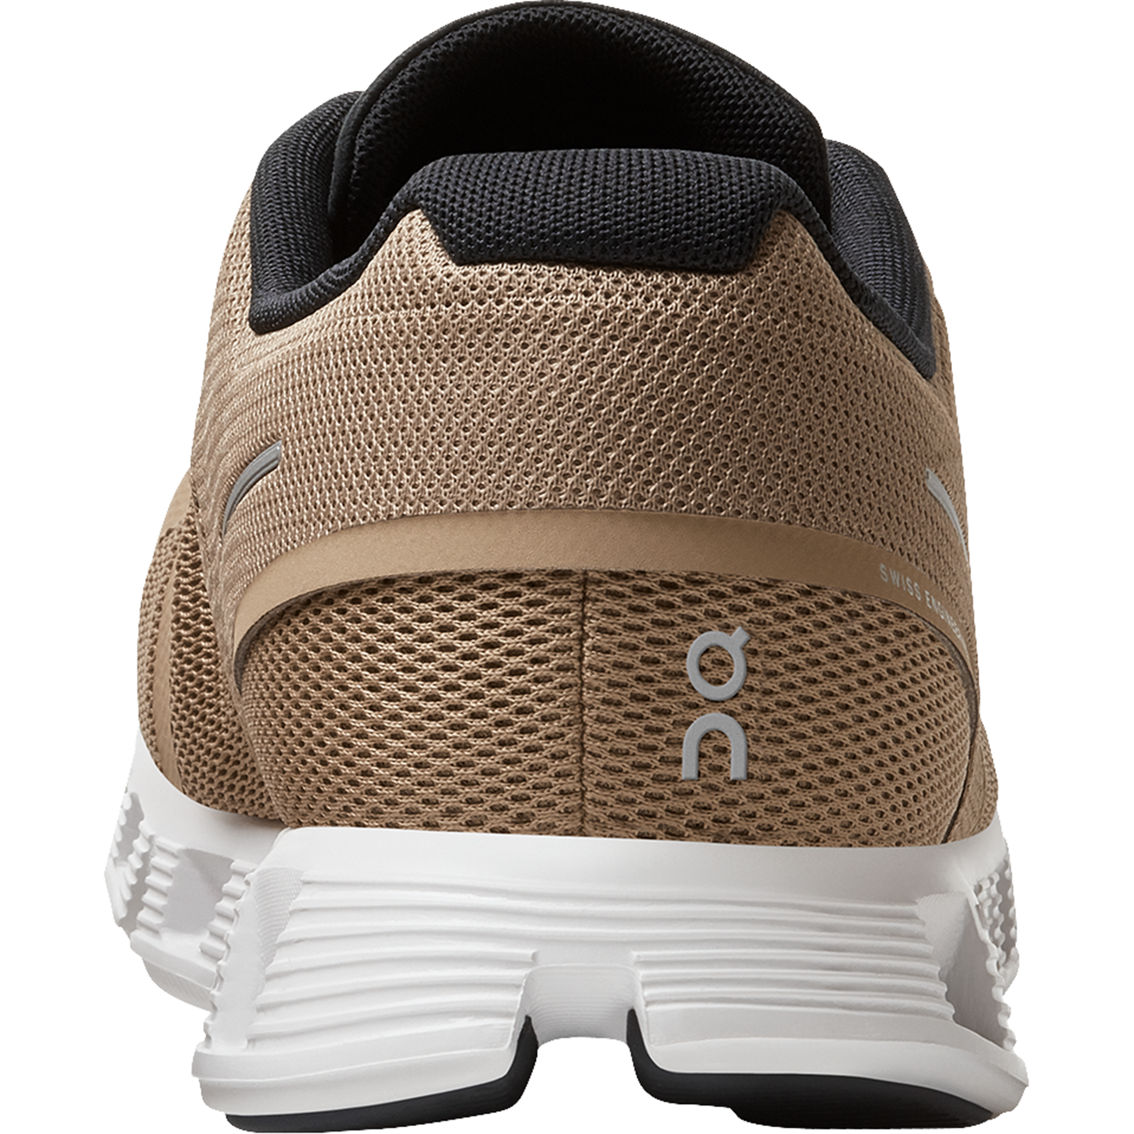 On Men's Cloud 5 Running Shoes - Image 6 of 6